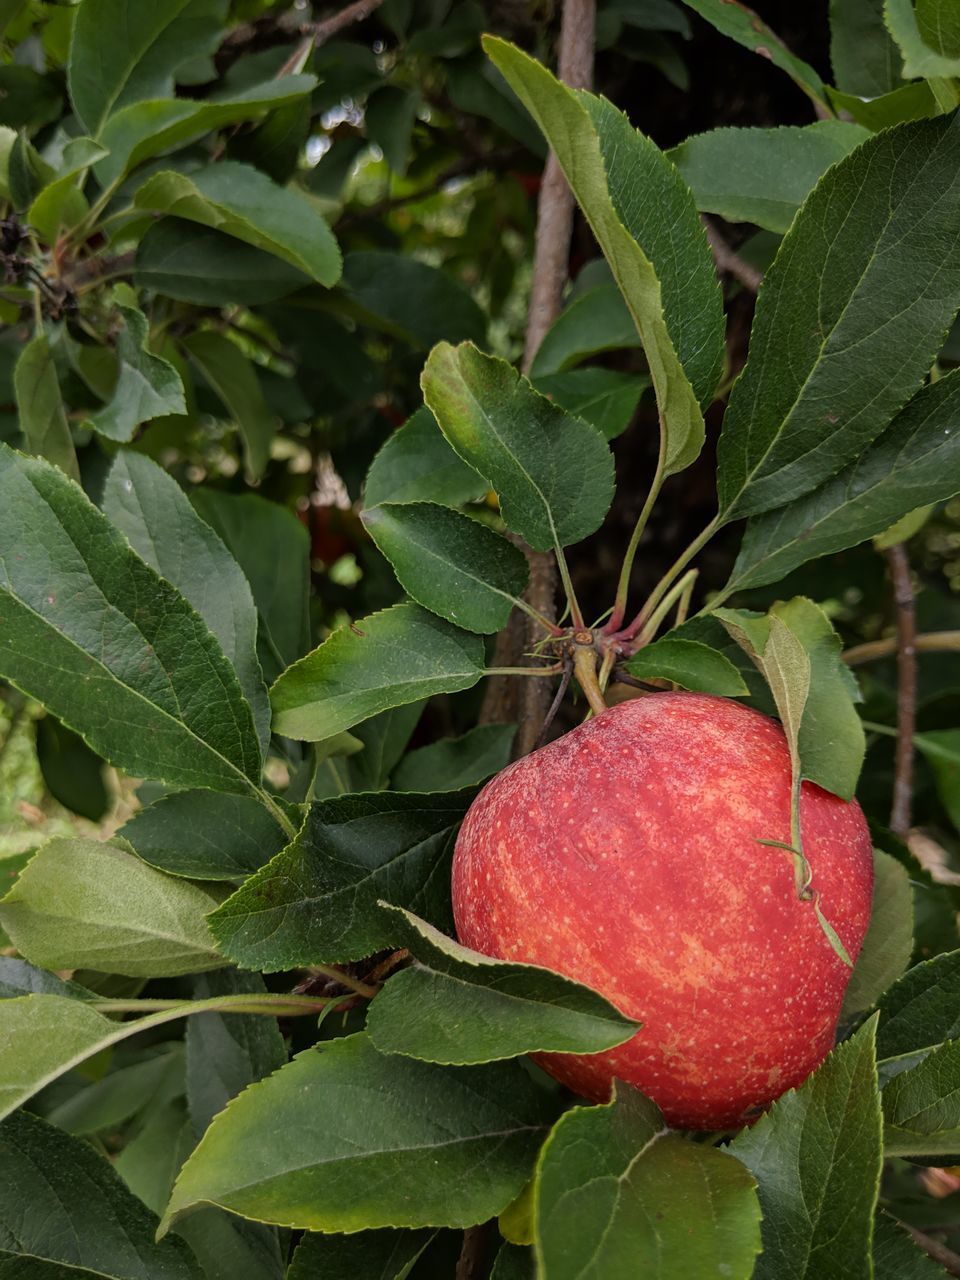 CLOSE-UP OF APPLE GROWING IN PLANT